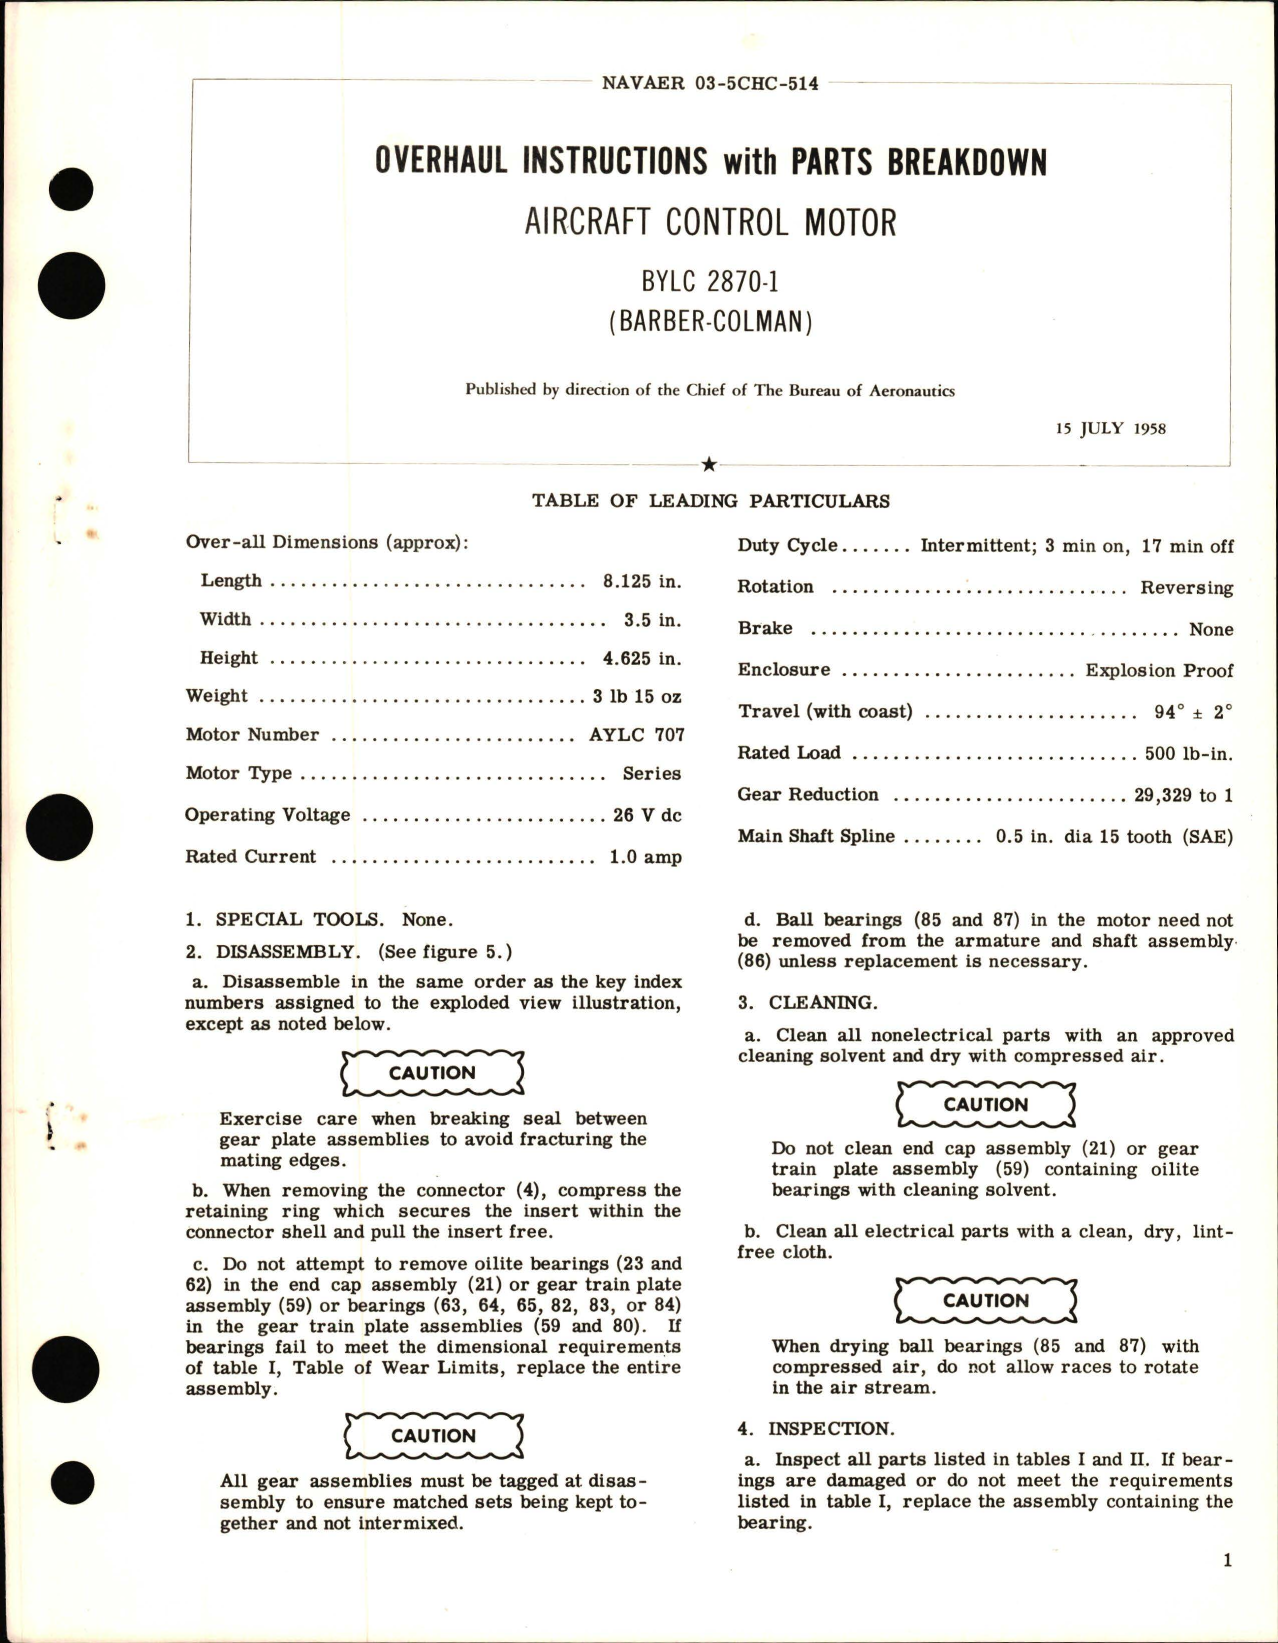 Sample page 1 from AirCorps Library document: Overhaul Instructions with Parts Breakdown for Aircraft Control Motor - BYLC 2870-1